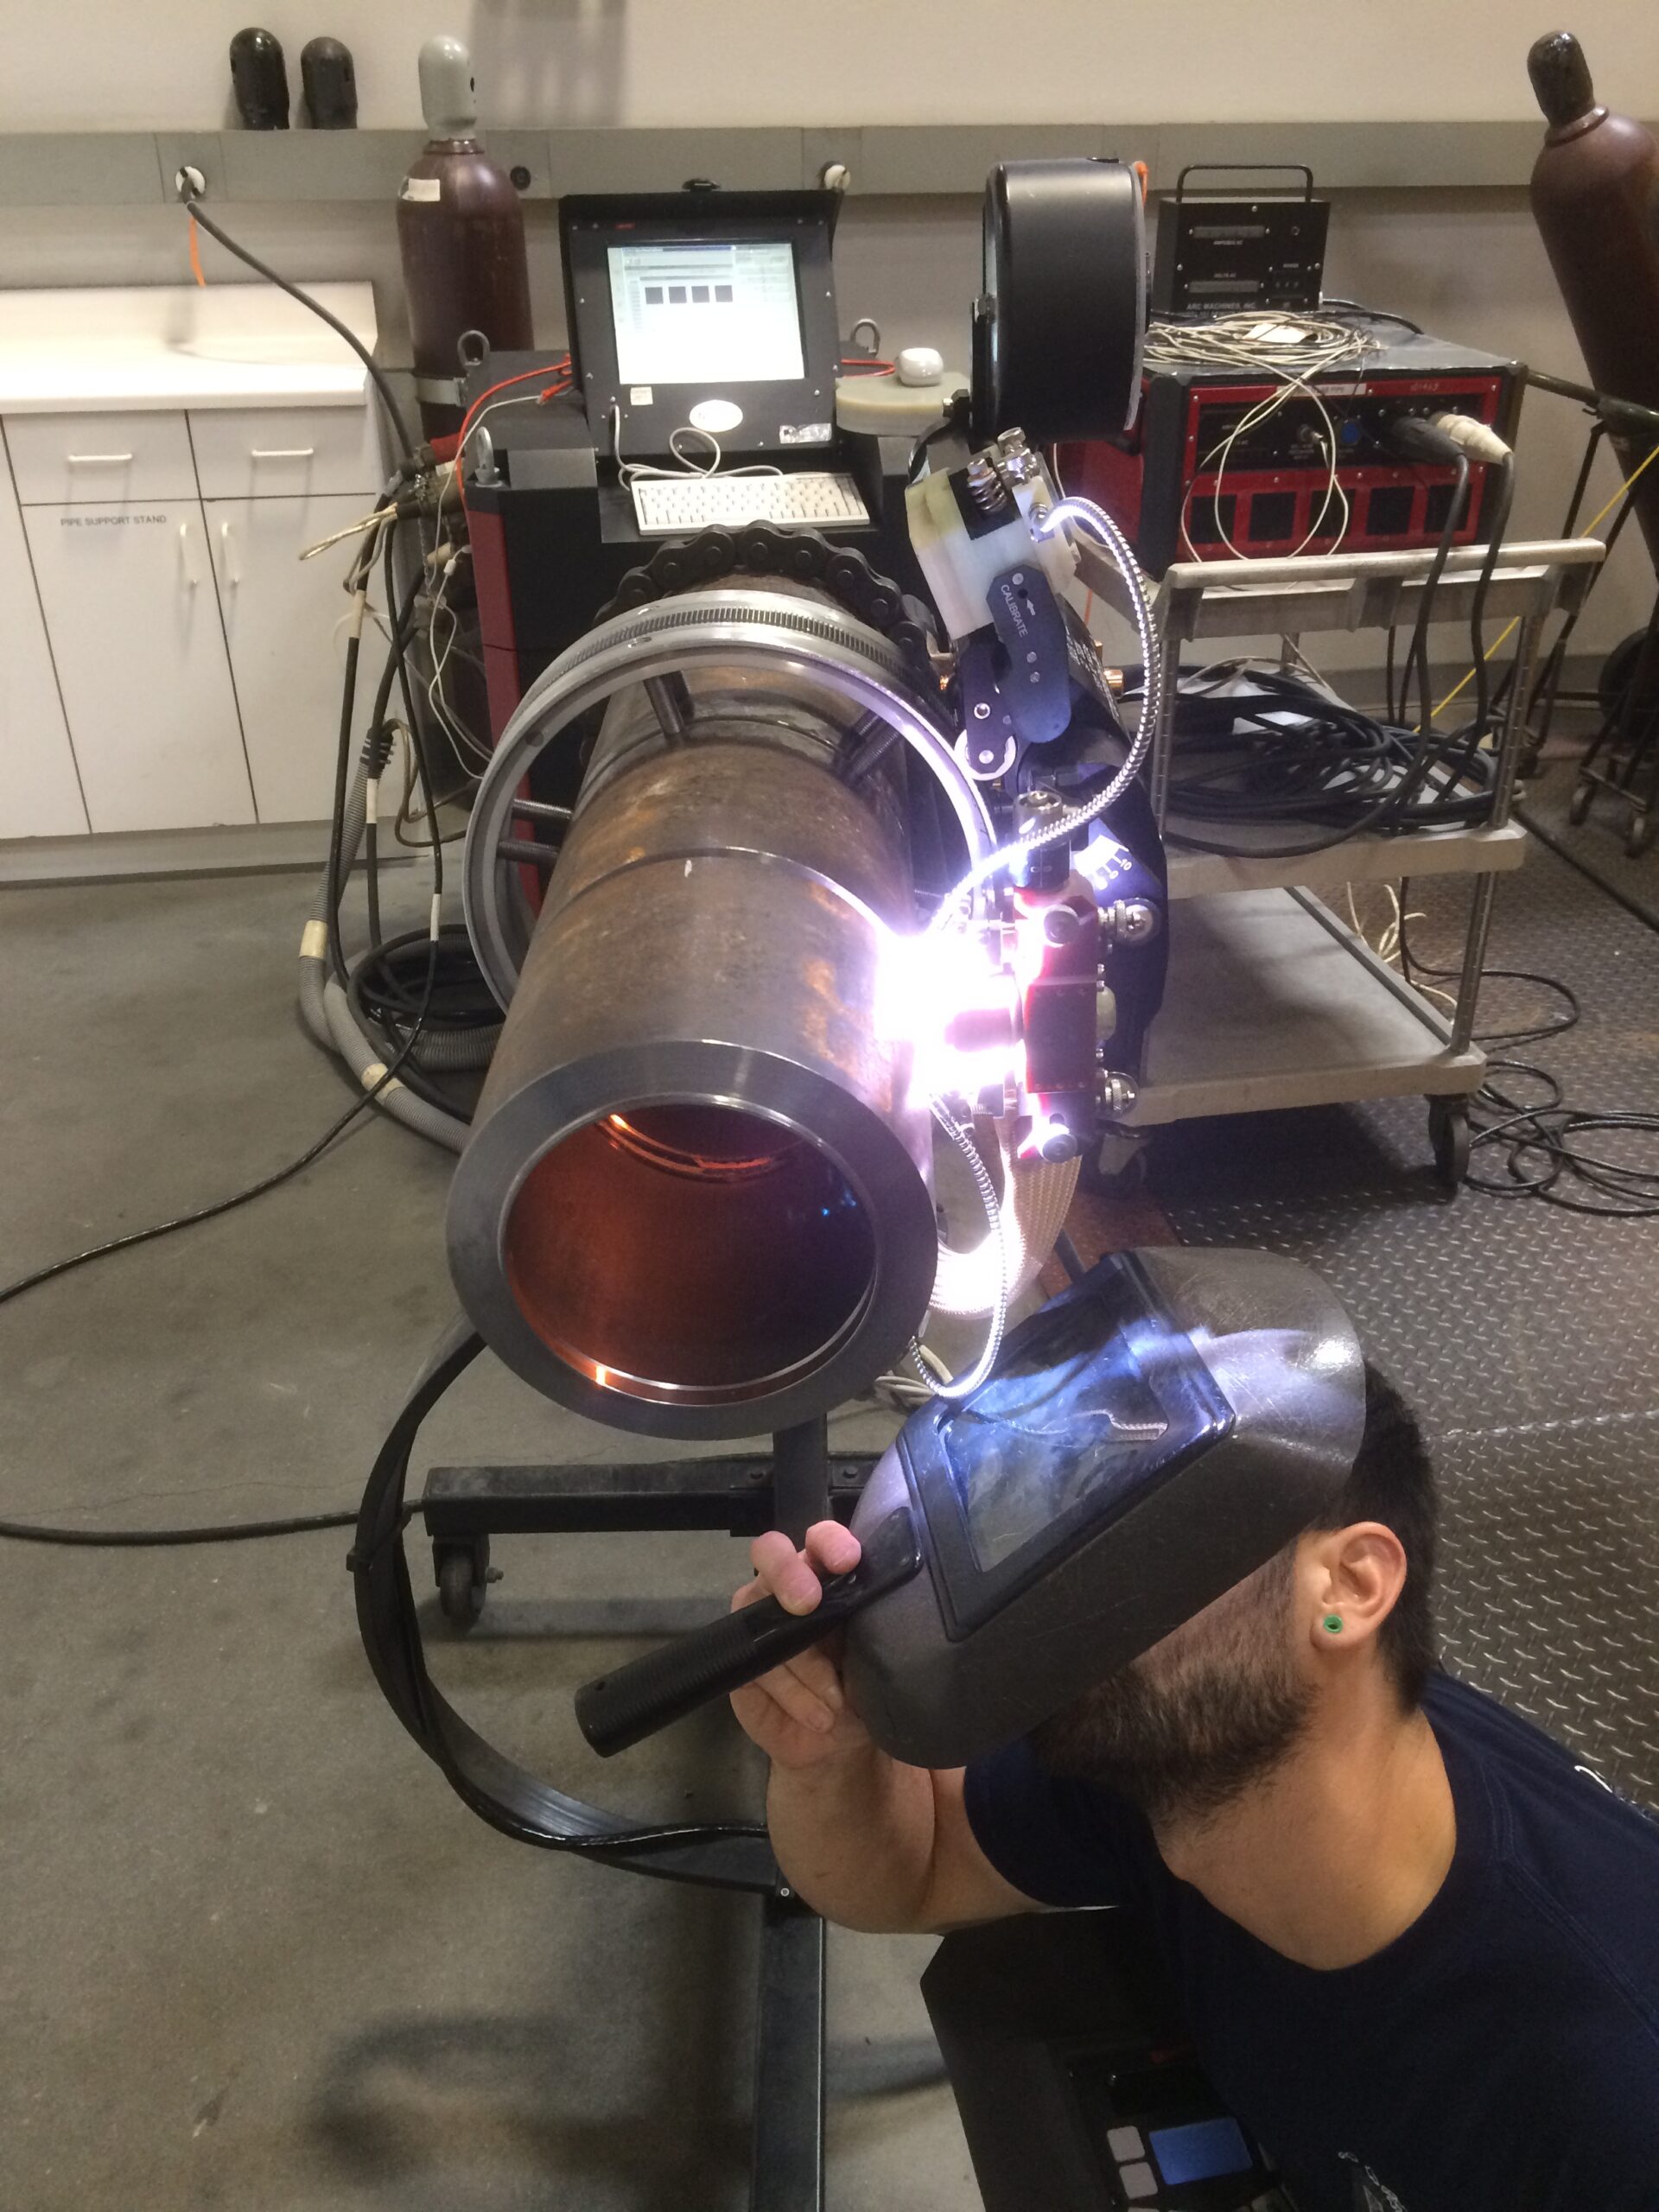 An image of an orbital TIG welding system includes a power supply, weld head, and add-ons like sensors and cooling systems